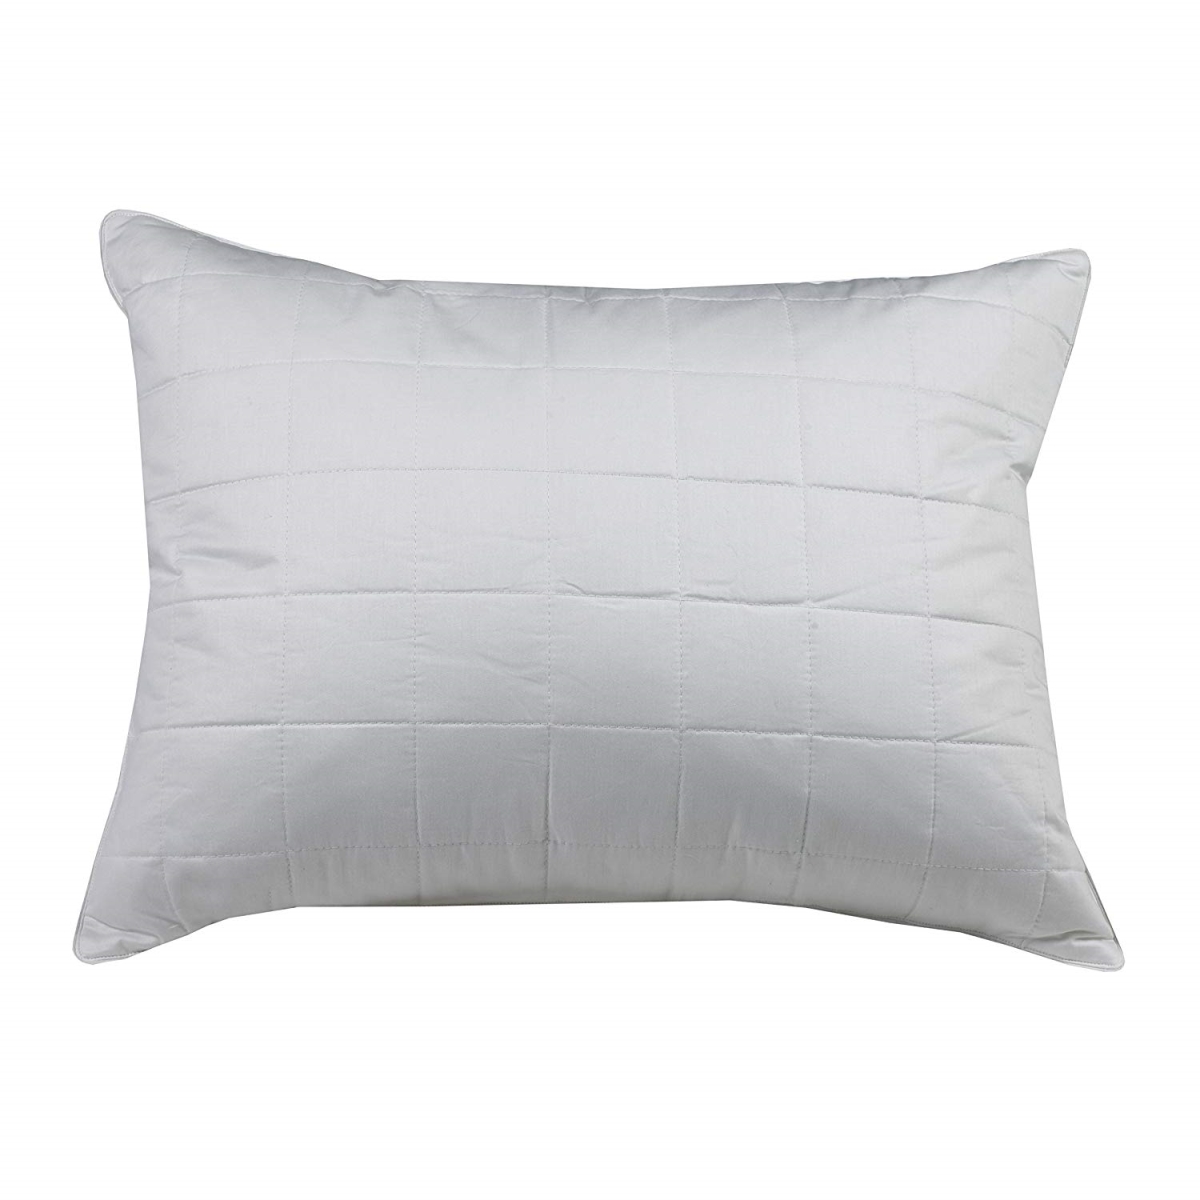 411096 Quilted Feather Pillow, White - Queen Size